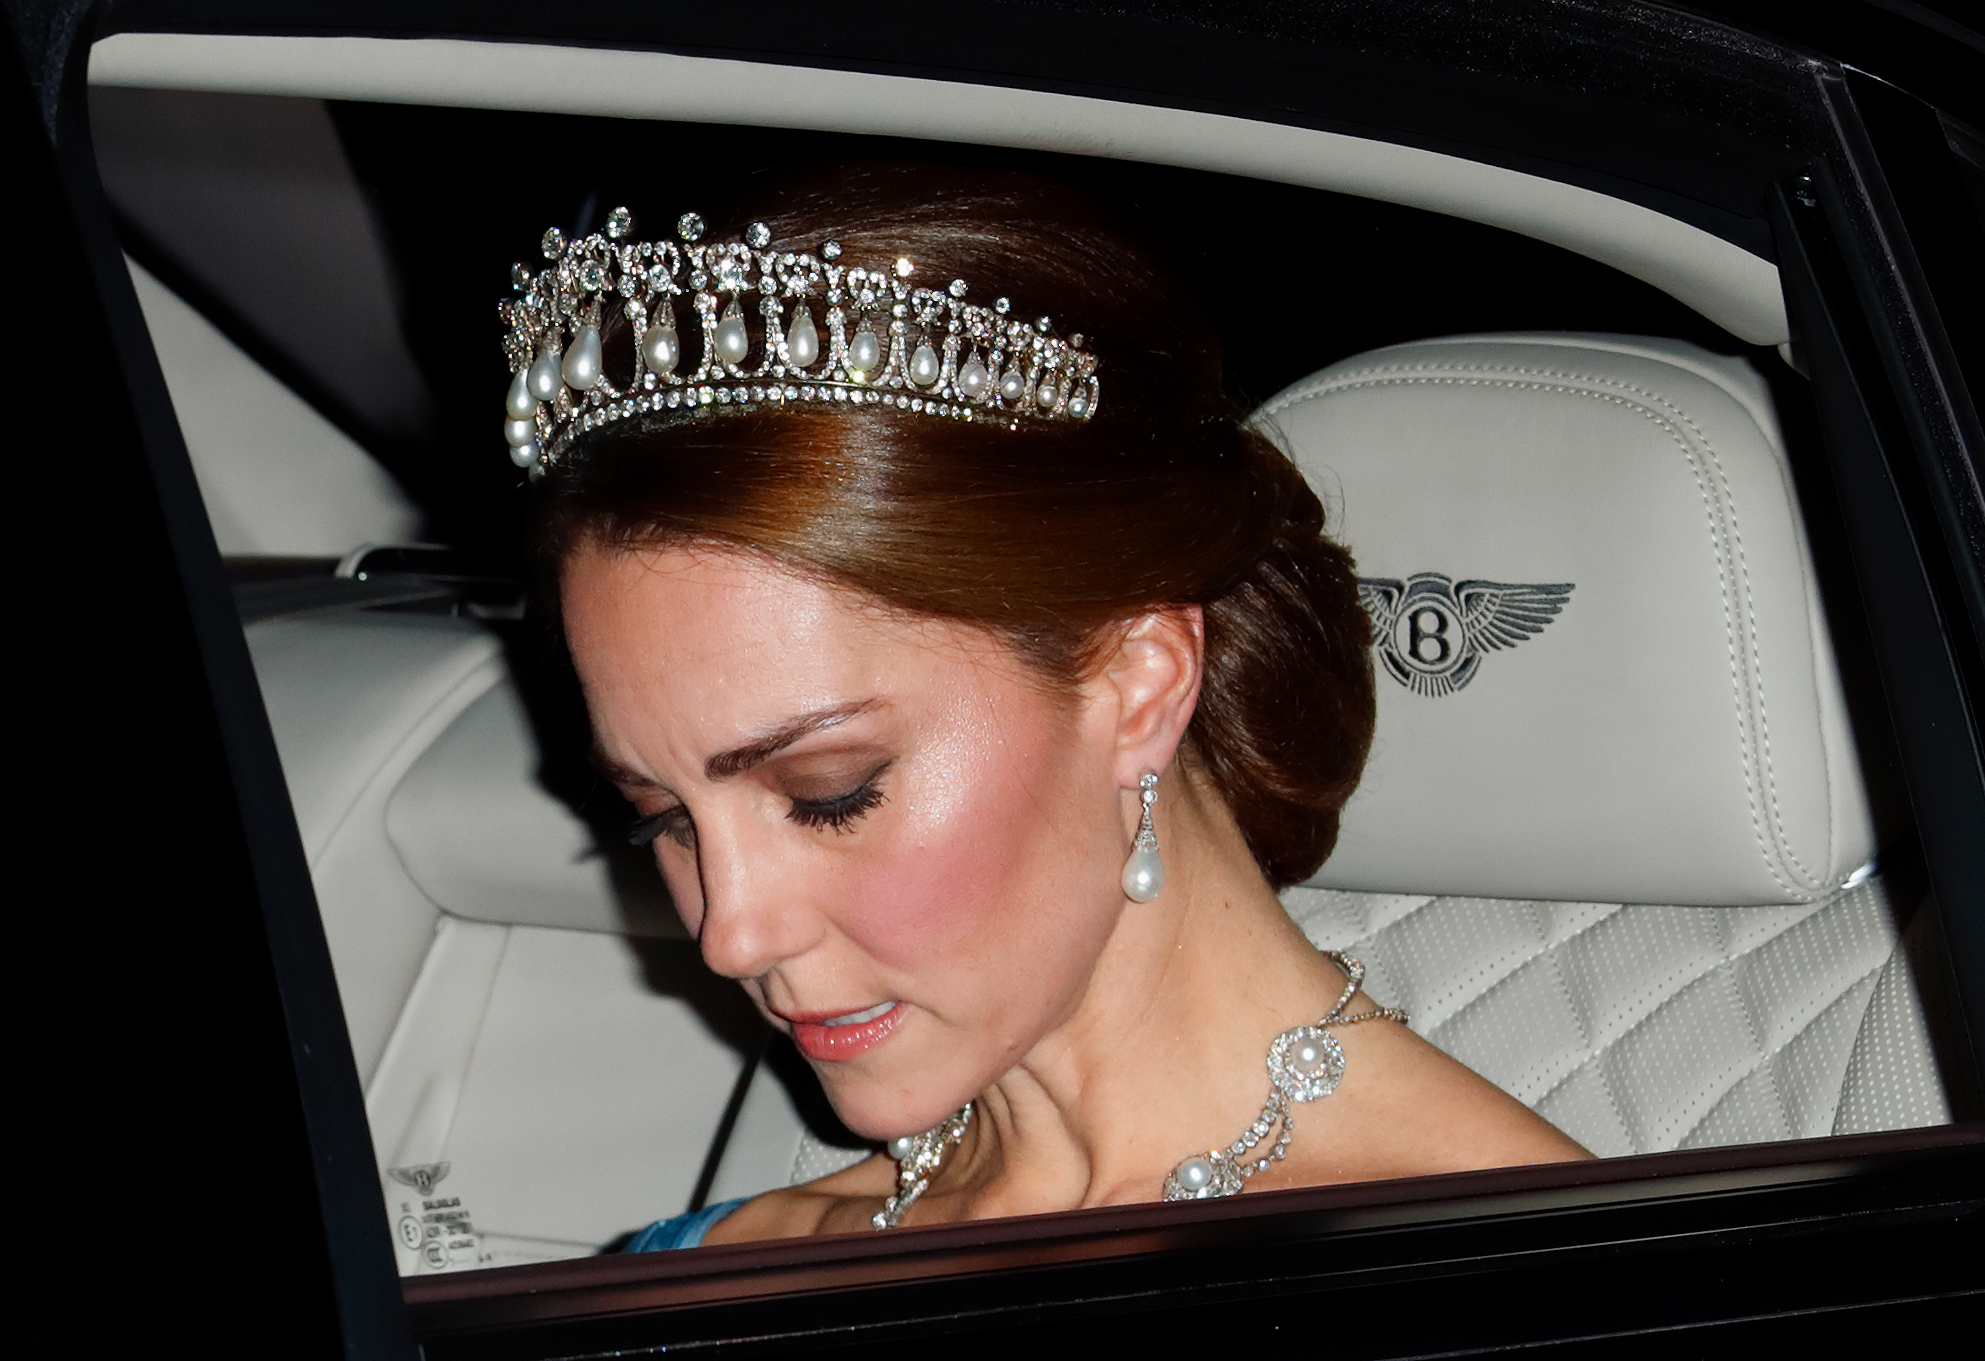 Kate Middleton departs Kensington Palace to attend a State Banquet at Buckingham Palace on October 23, 2018 in London, United Kingdom. | Source: Getty Images